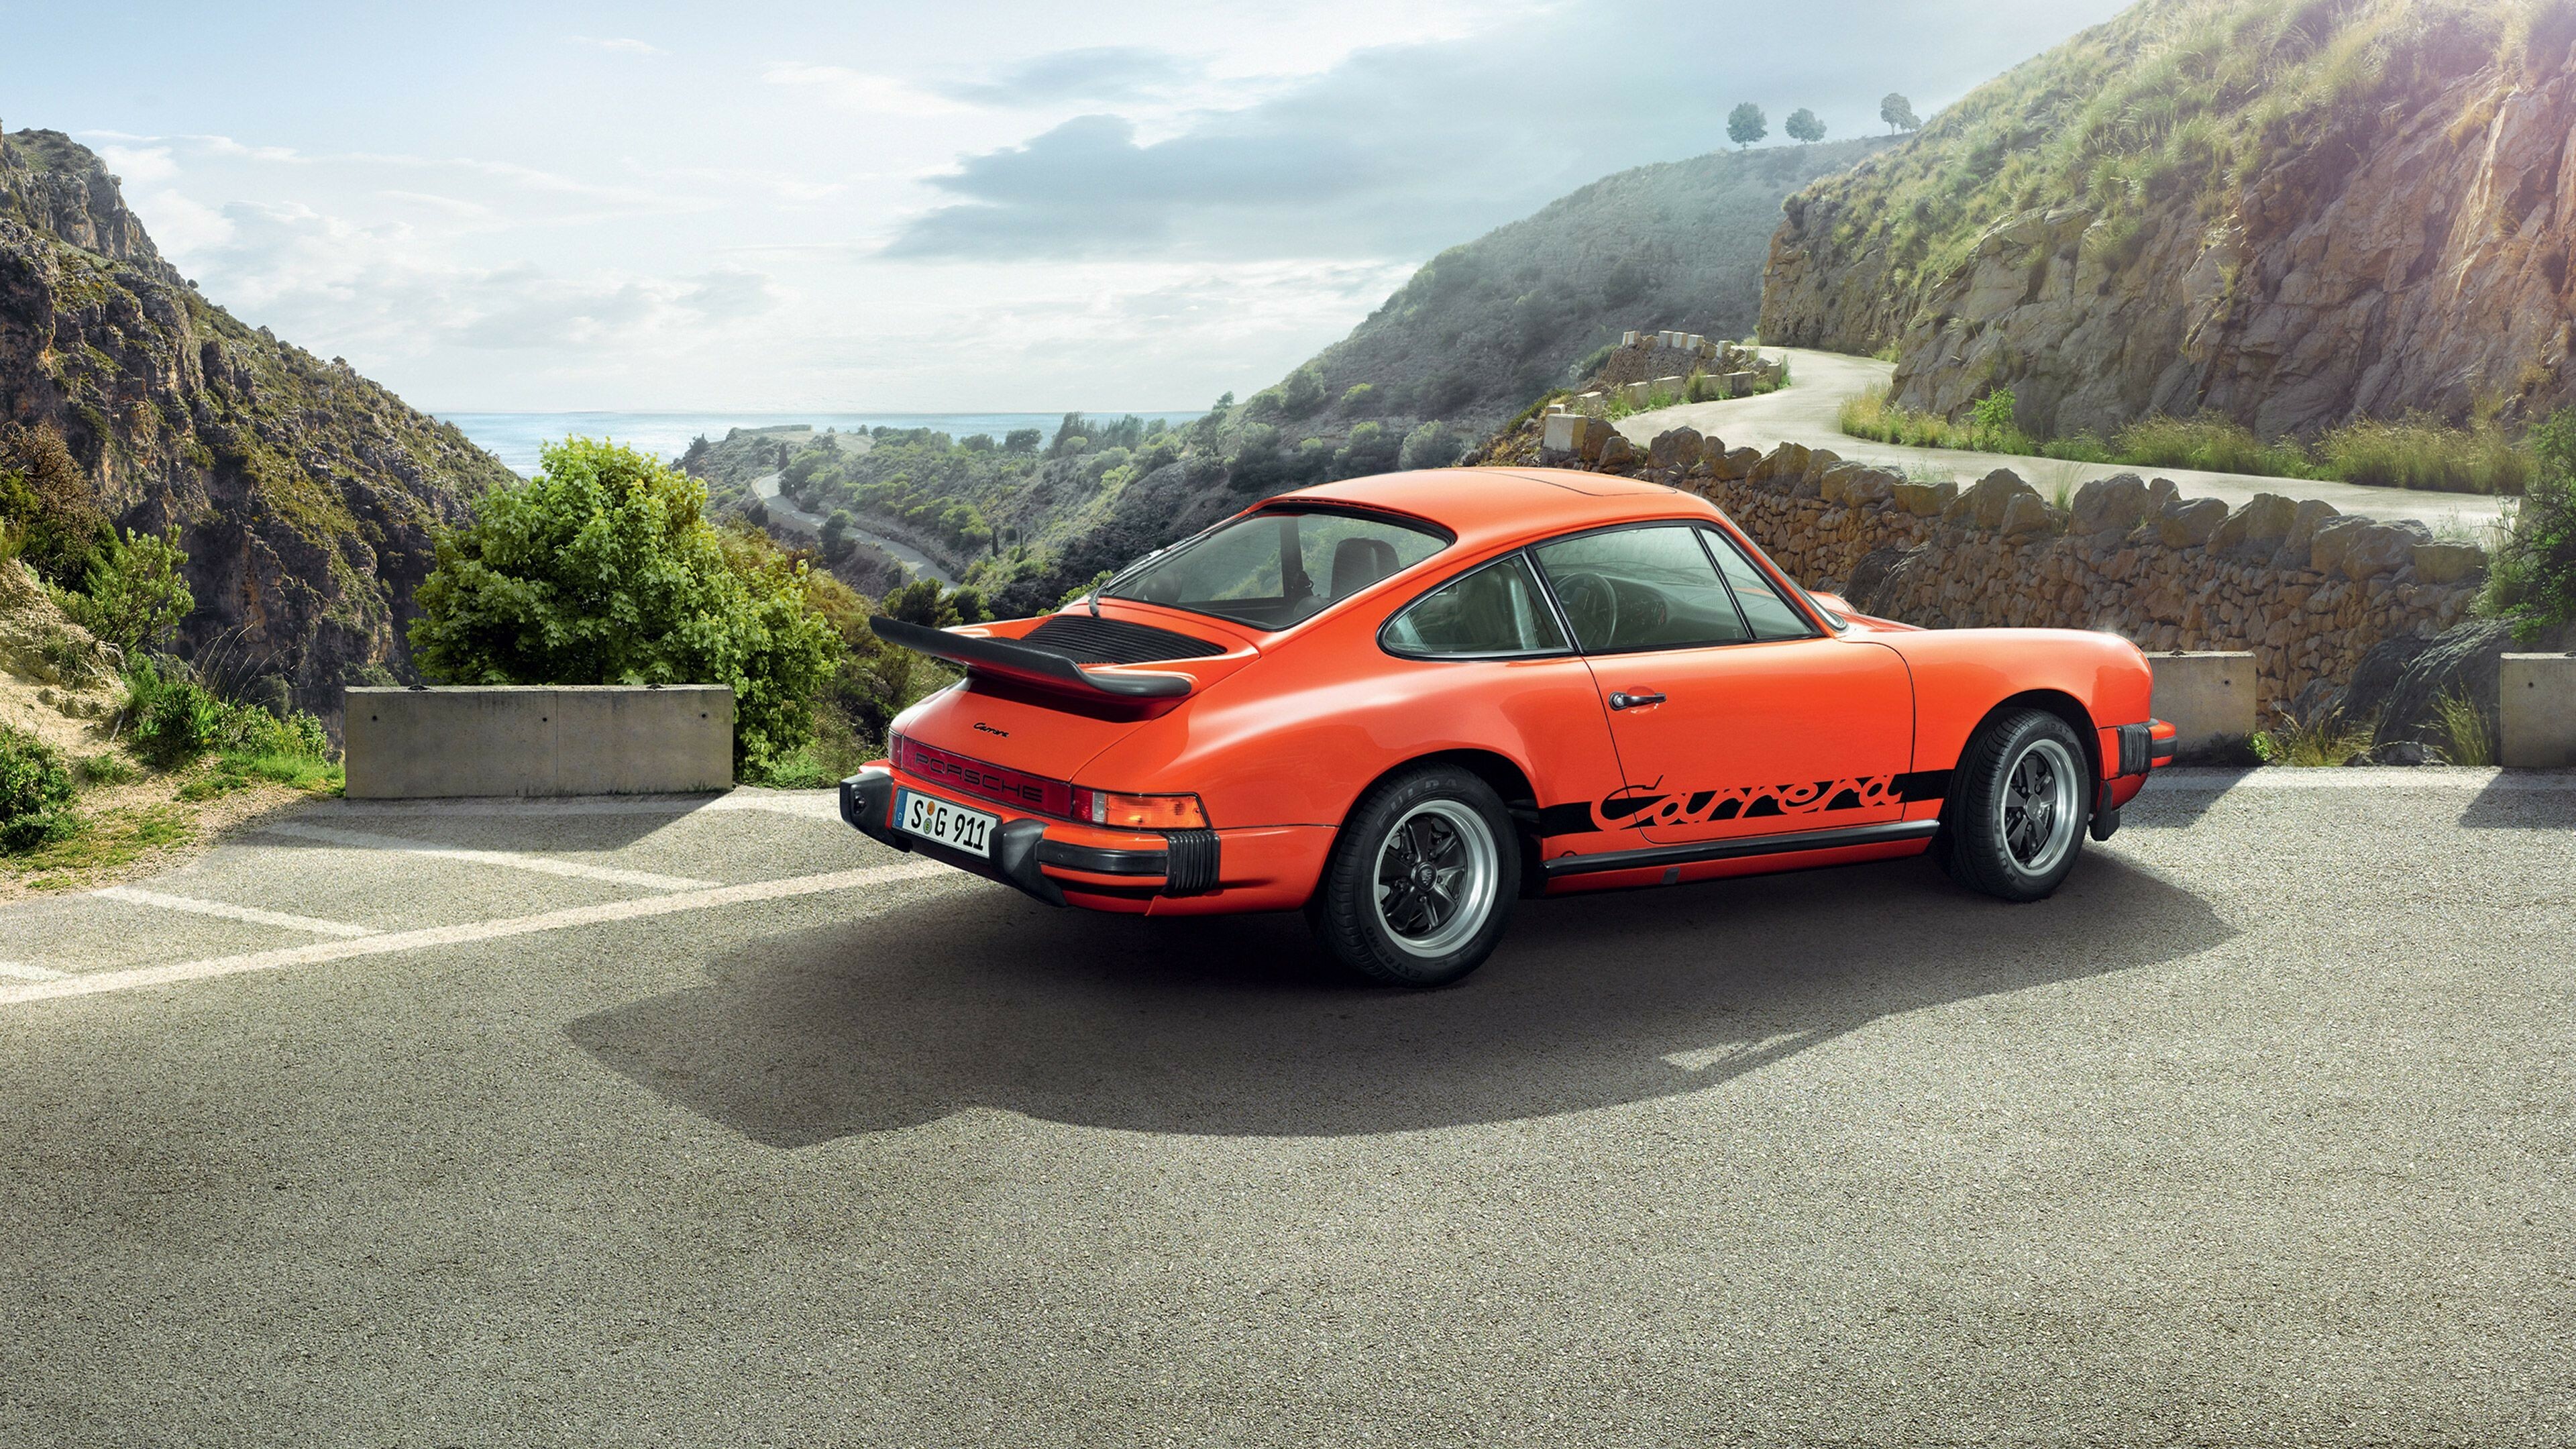 Porsche 911: The engines were air-cooled until the introduction of the 996 series in 1998, Carrera. 3840x2160 4K Wallpaper.